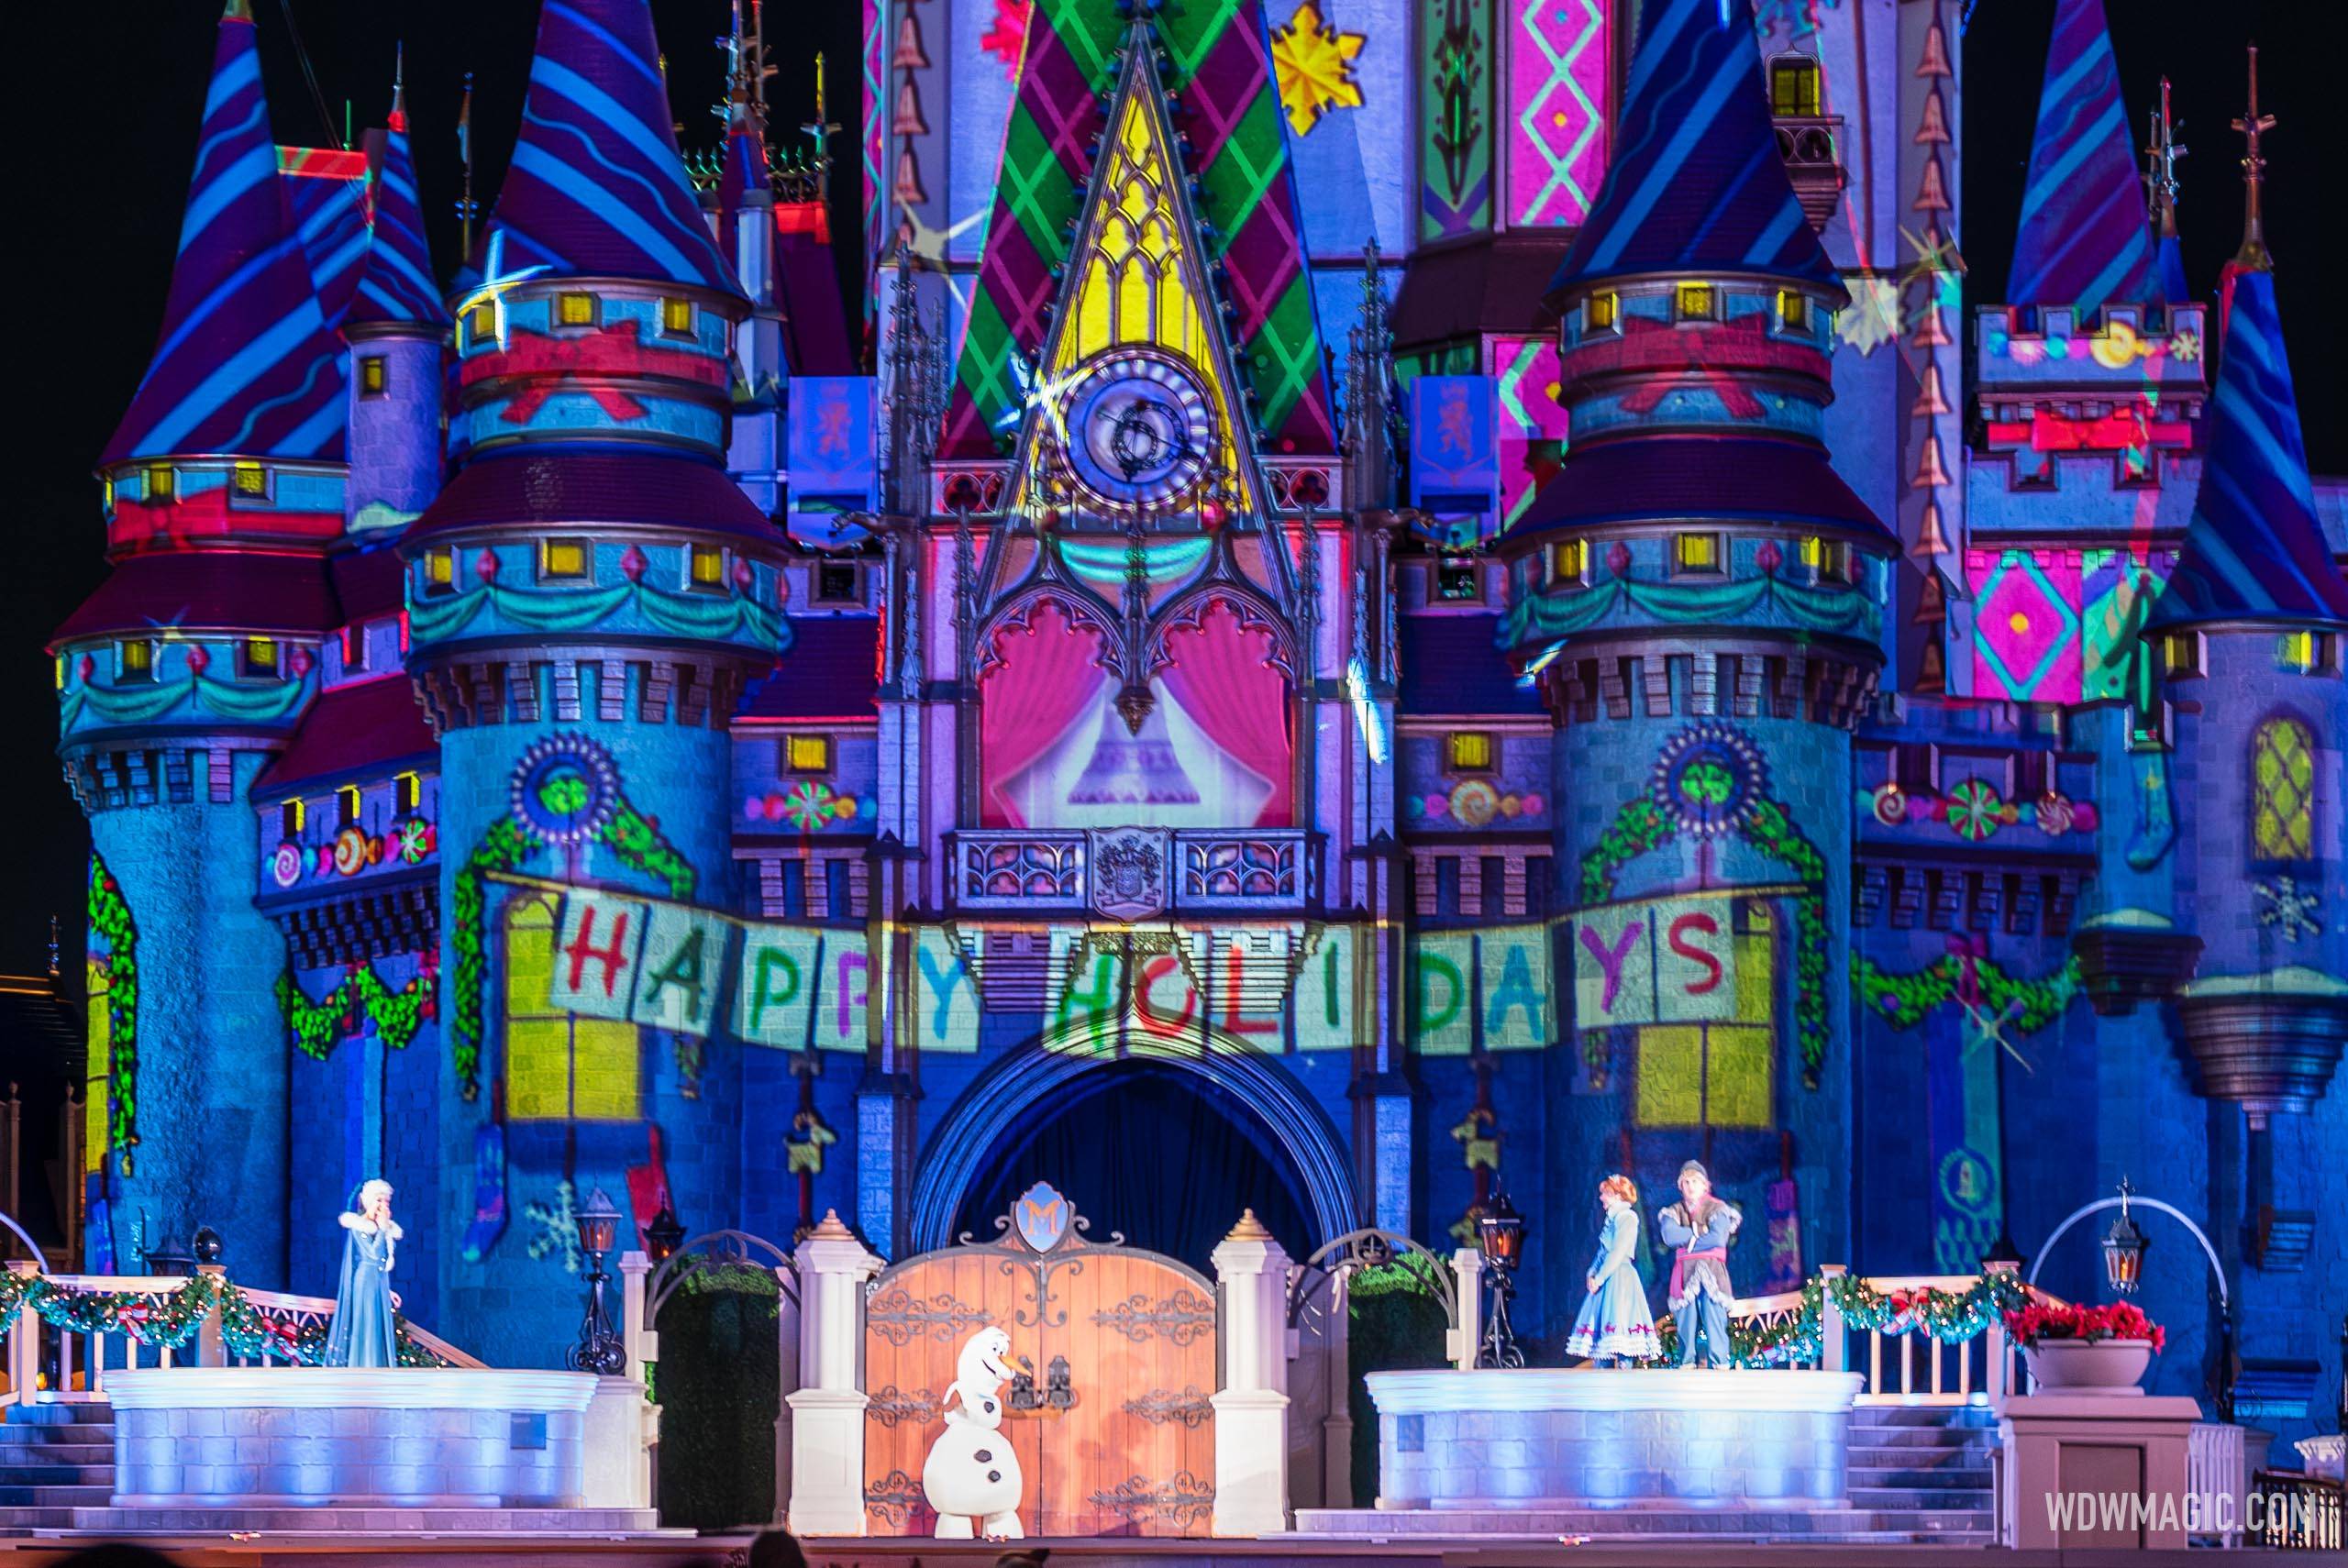 Frozen Holiday Surprise opening night